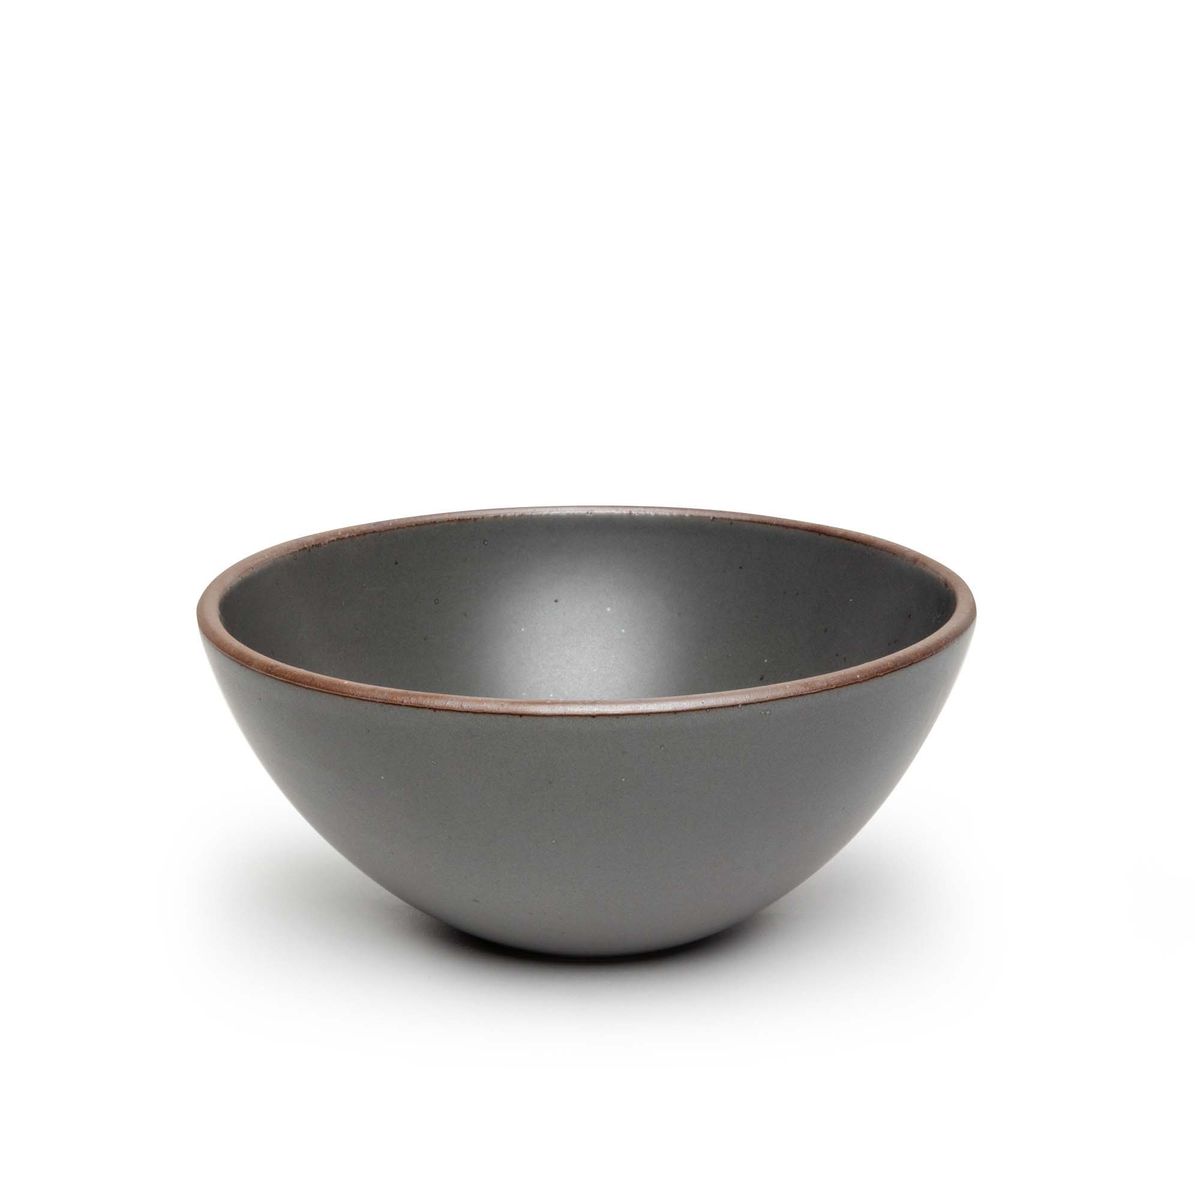 A large rounded ceramic bowl in a cool, medium grey color featuring iron speckles and an unglazed rim